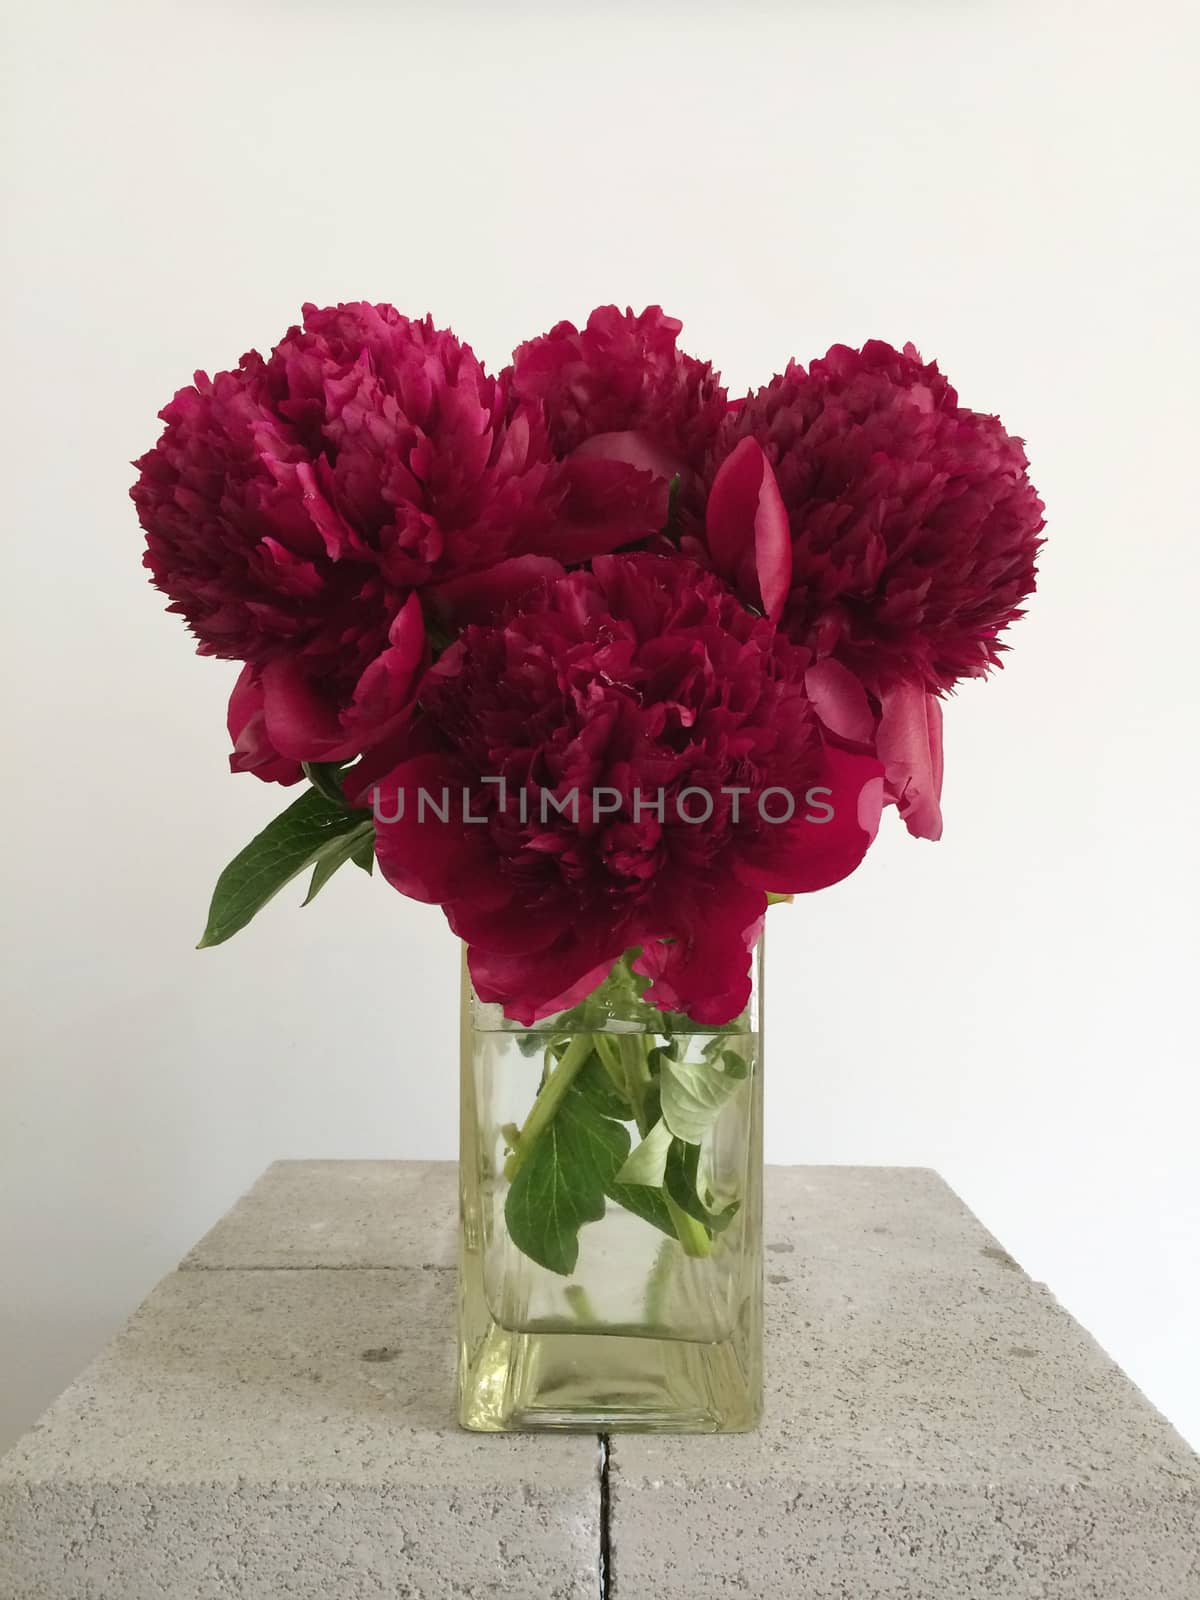 Bouquet of red peonies by mmm